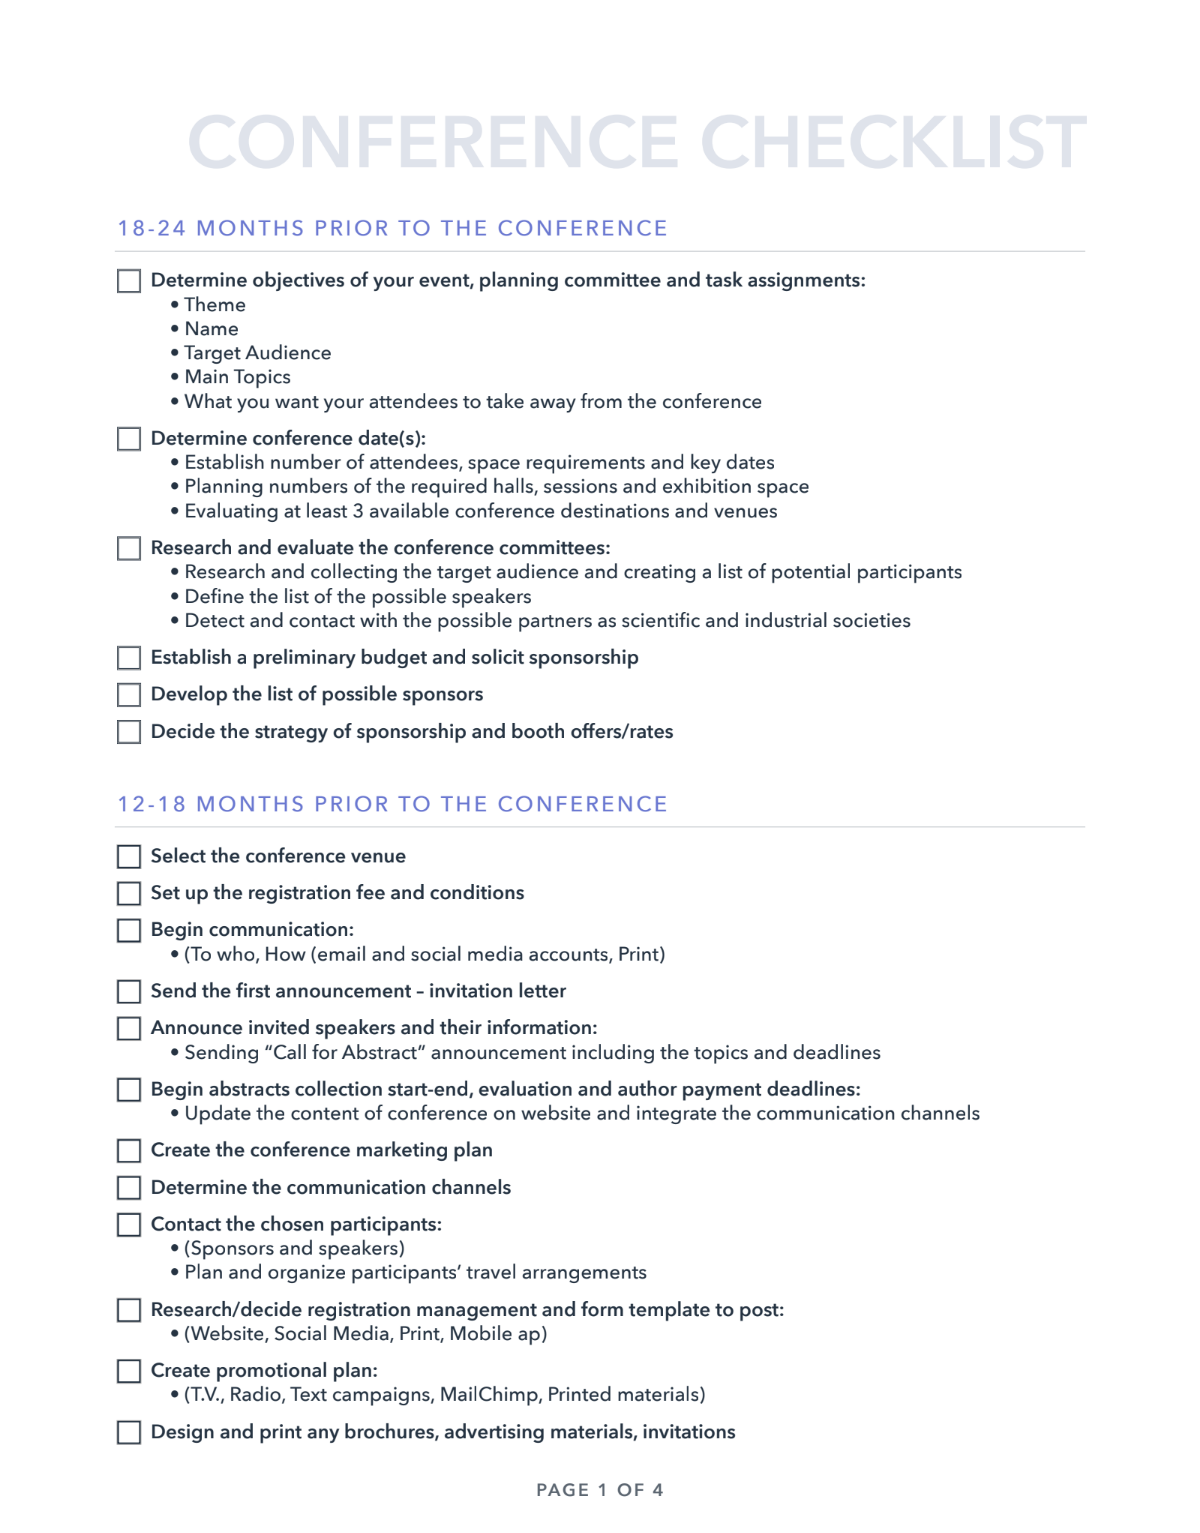 Conference planning checklist template on PDF